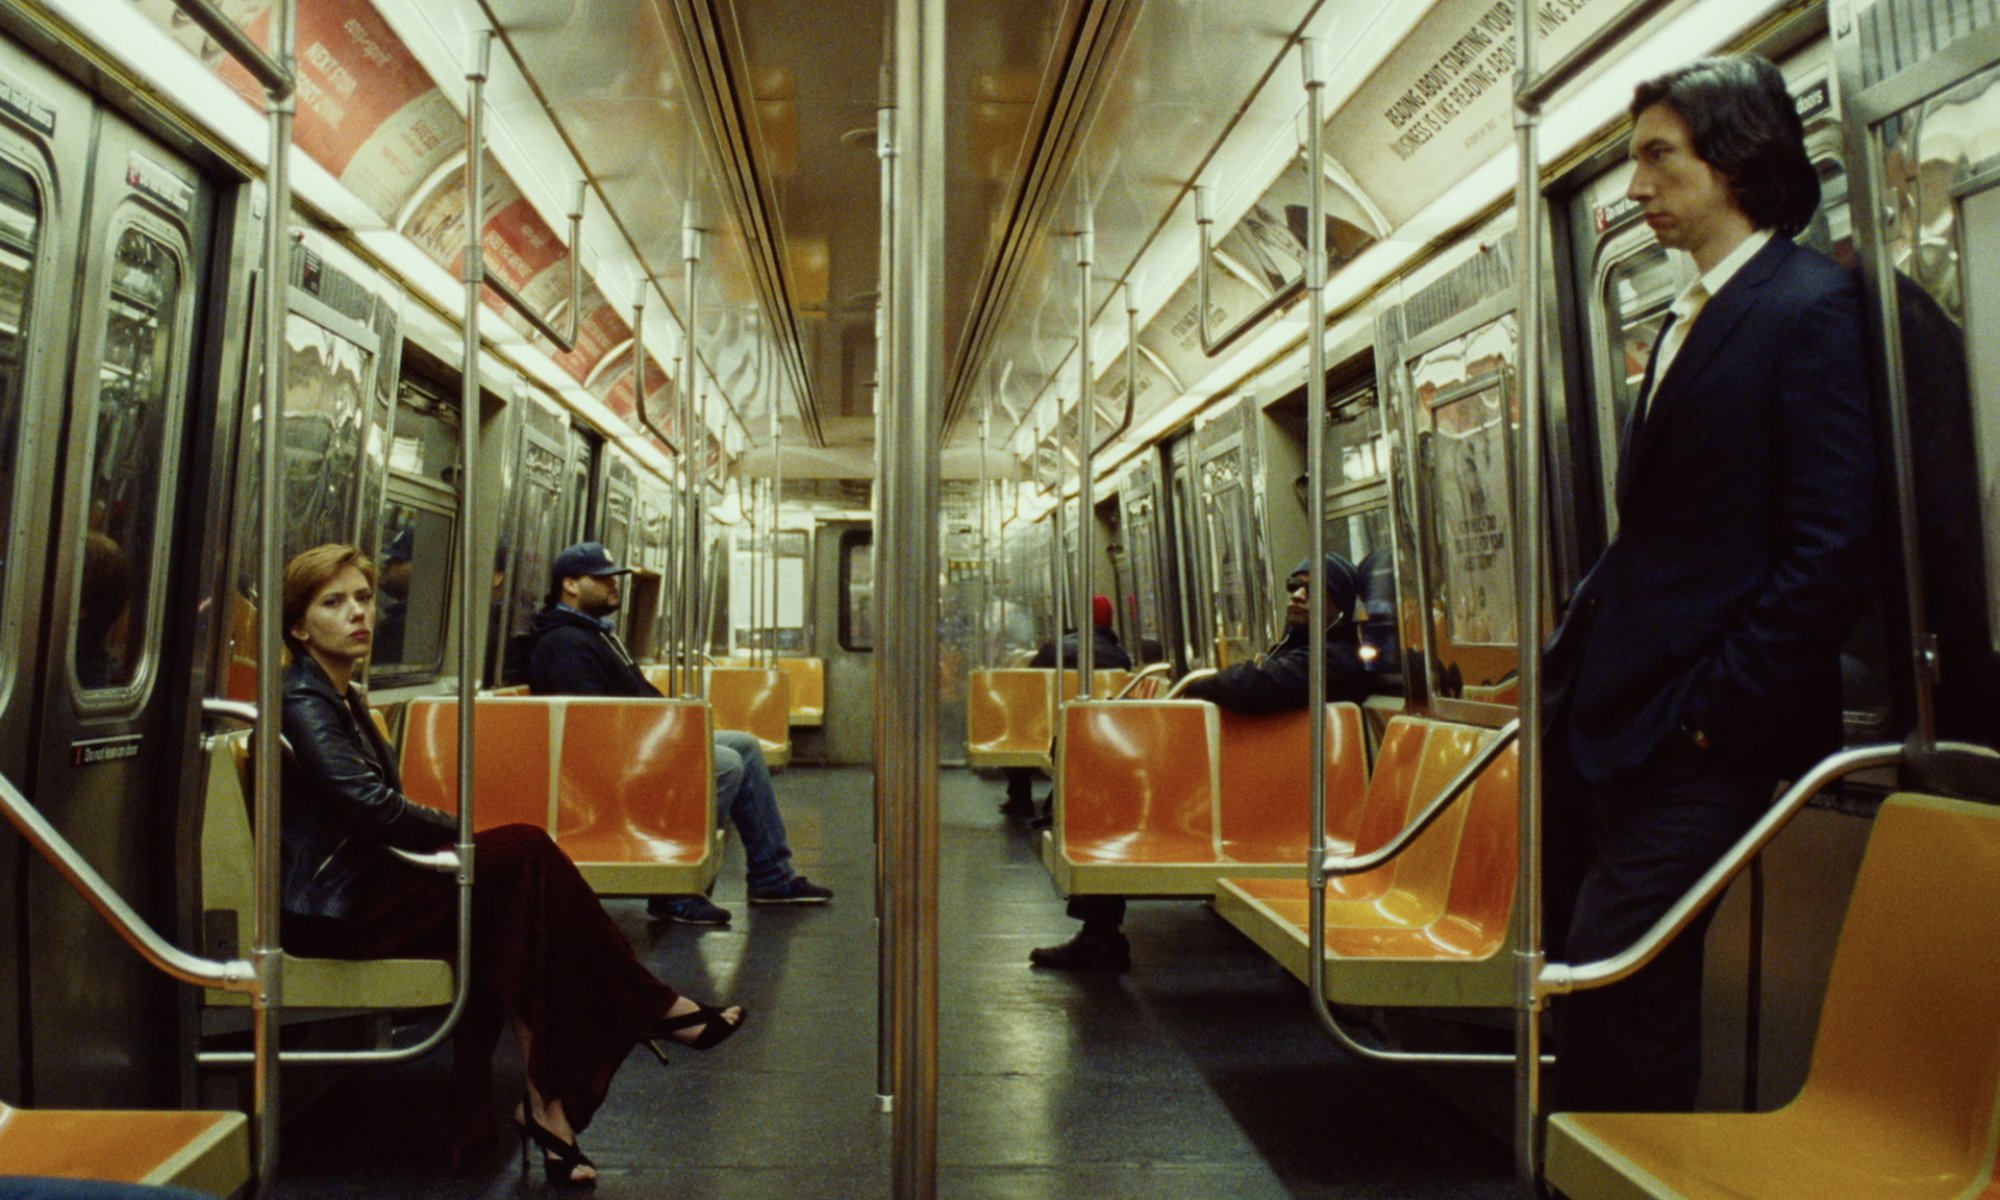 A man and woman at opposite ends of a New York City subway car; still from "Marriage Story."